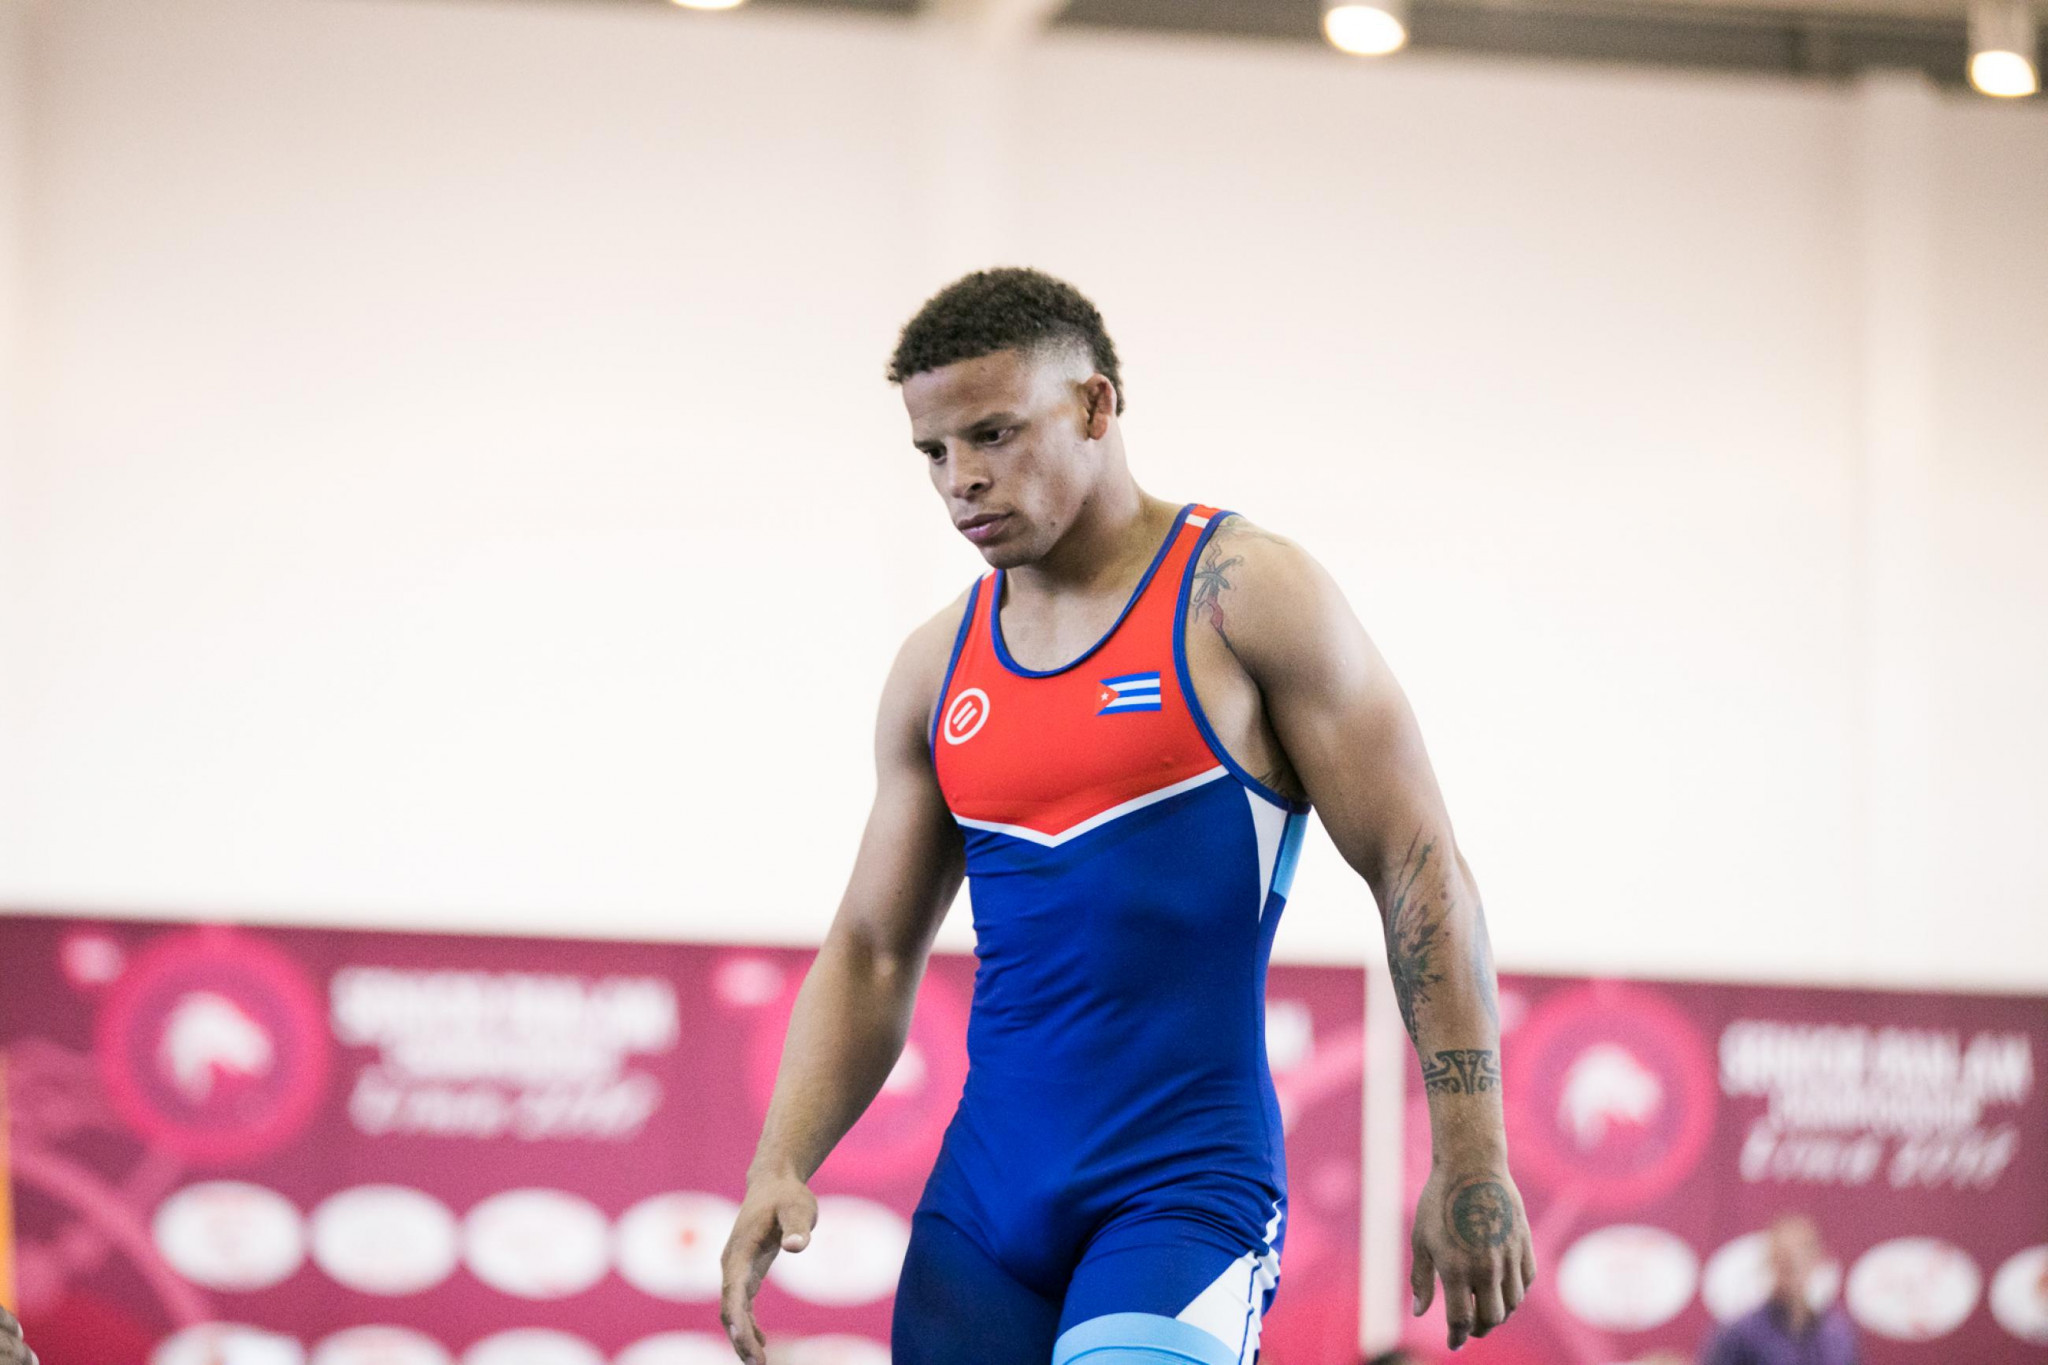 Ismael Borrero Molina claimed gold on the opening day of competition ©UWW